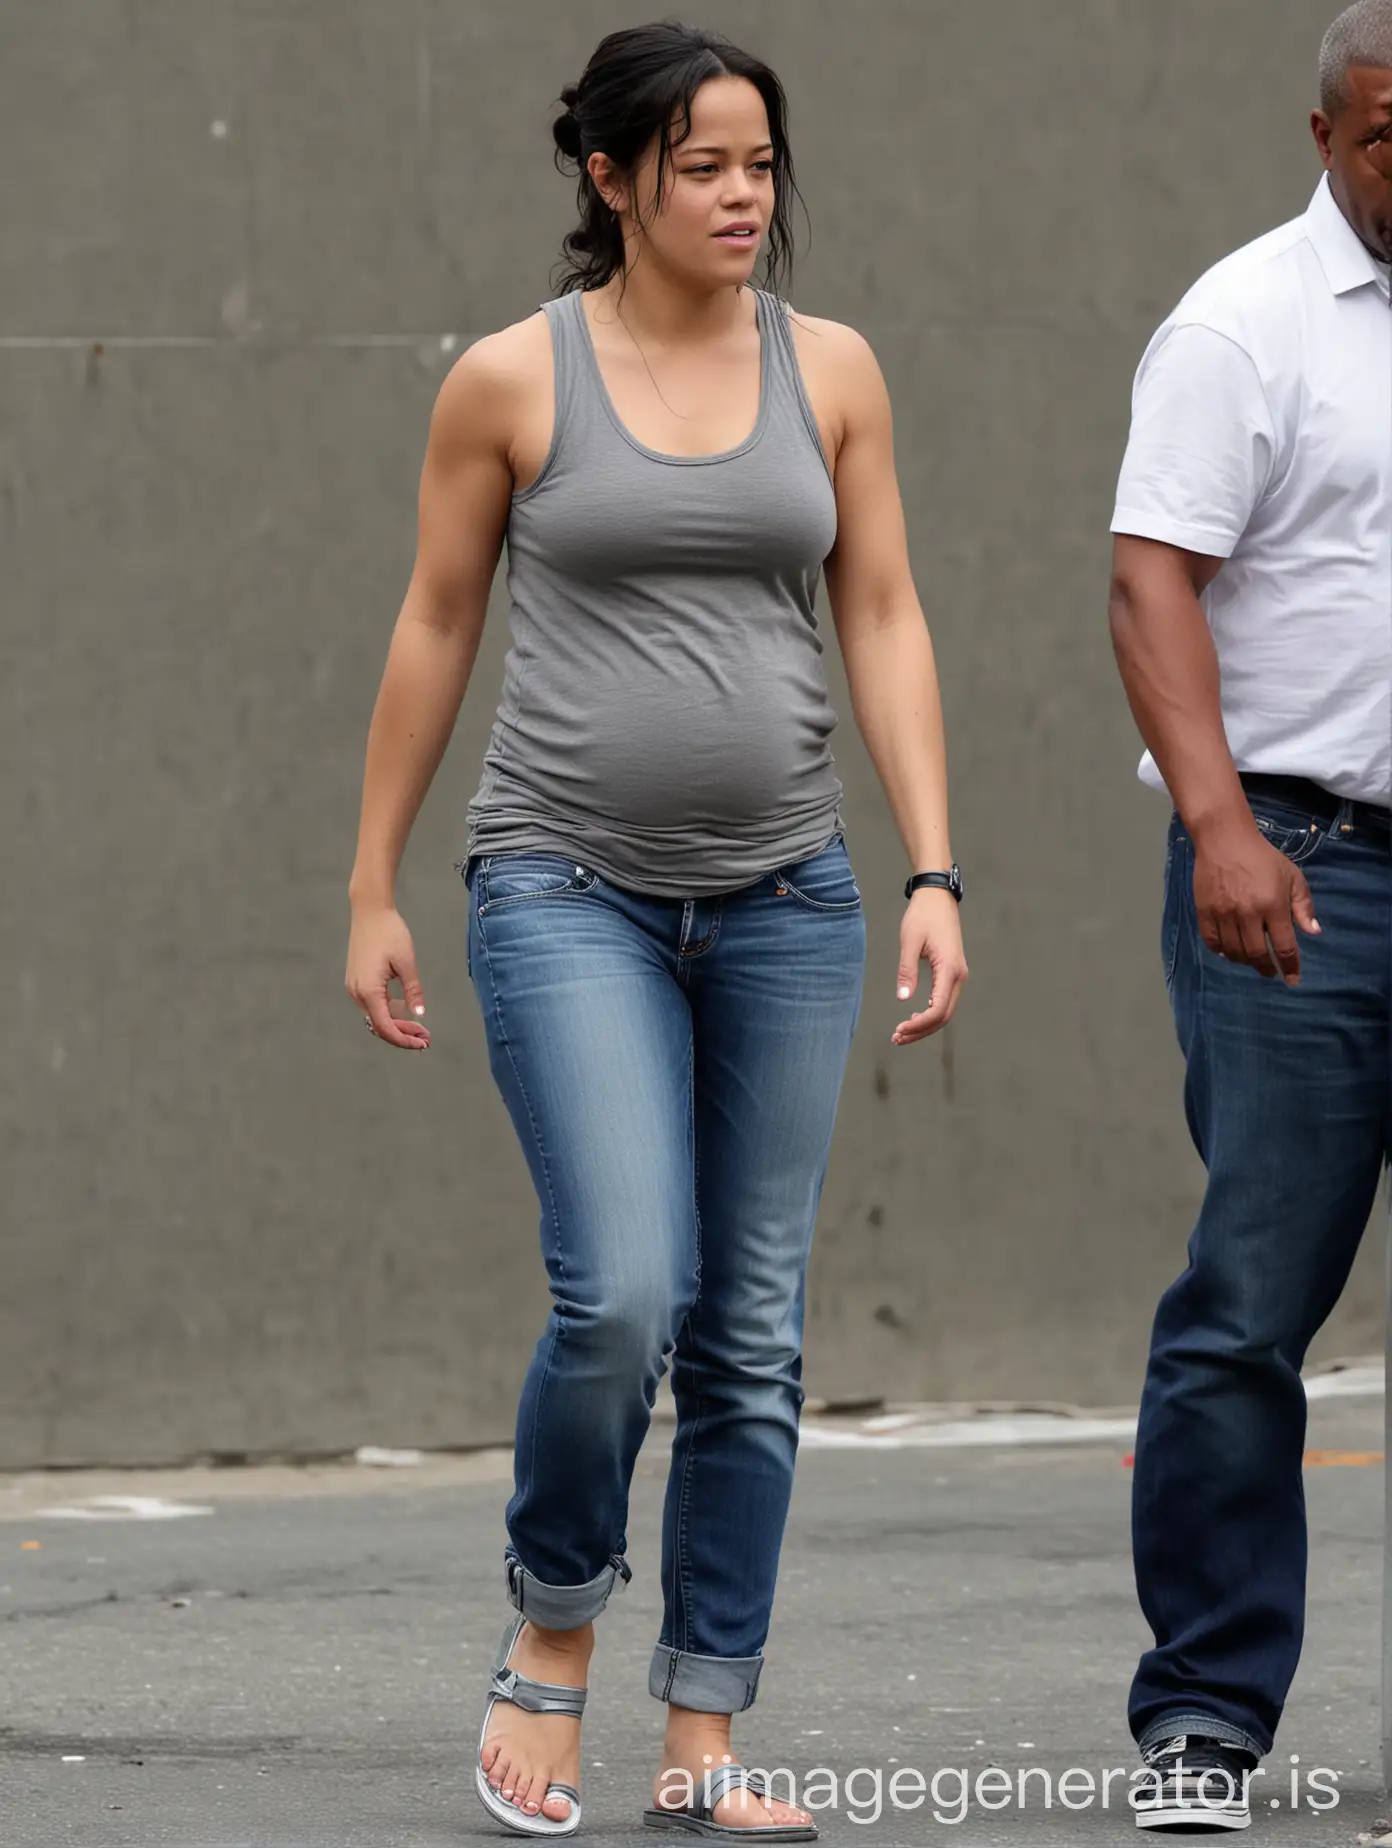 Michelle Rodriguez wearing grey tank top and blue jeans with silver flip flops , pregnant as a single mum, getting arrested